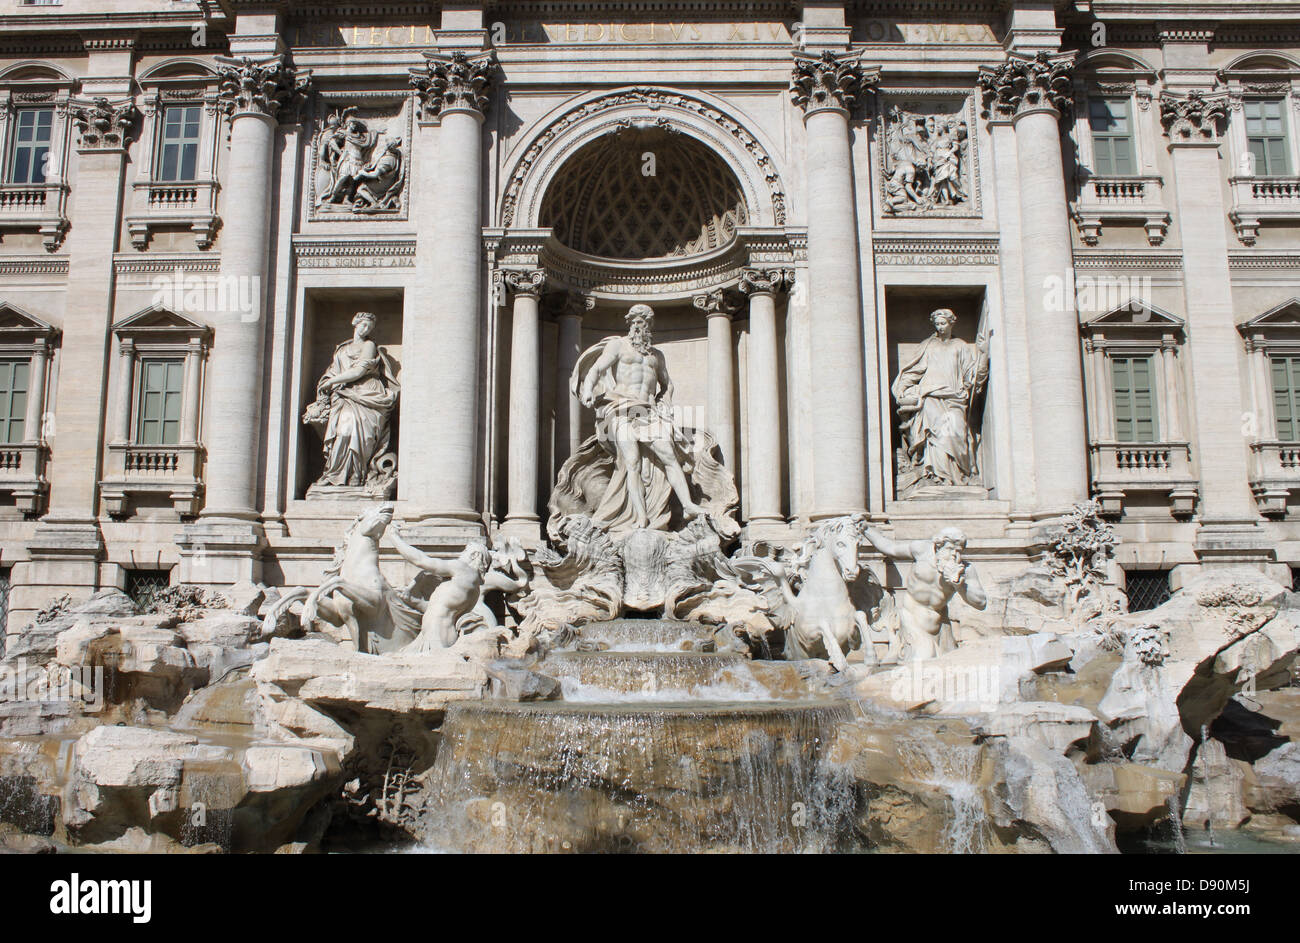 Landscape view of Trevi Fountain in Rome, Italy Stock Photo